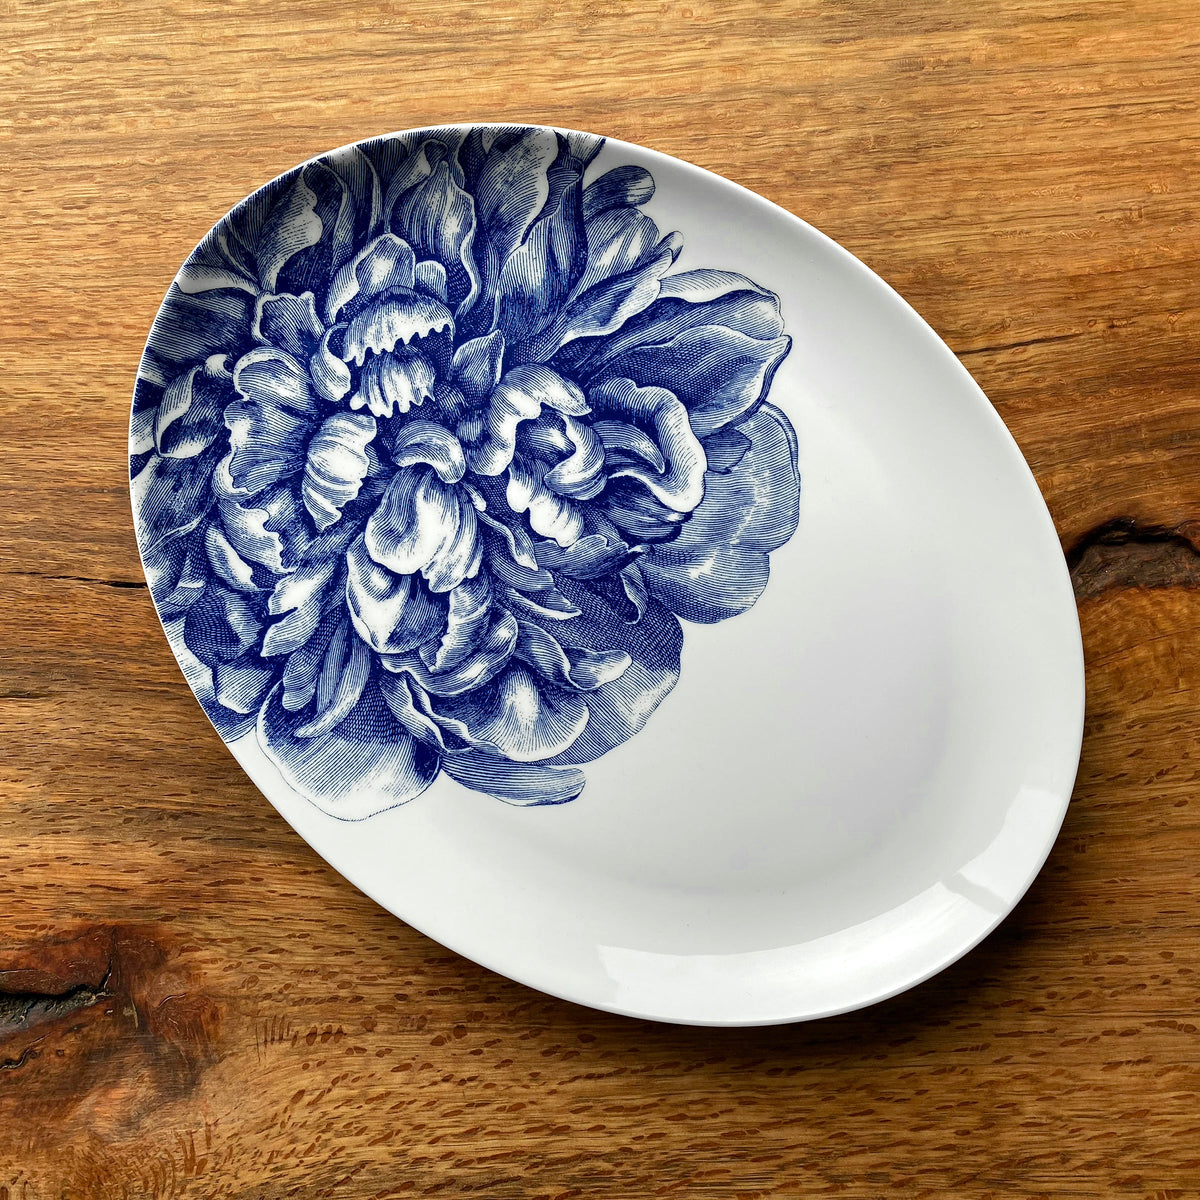 A Peony Medium Coupe Oval Platter with a blue floral pattern, placed on a wooden surface. - Caskata Artisanal Home